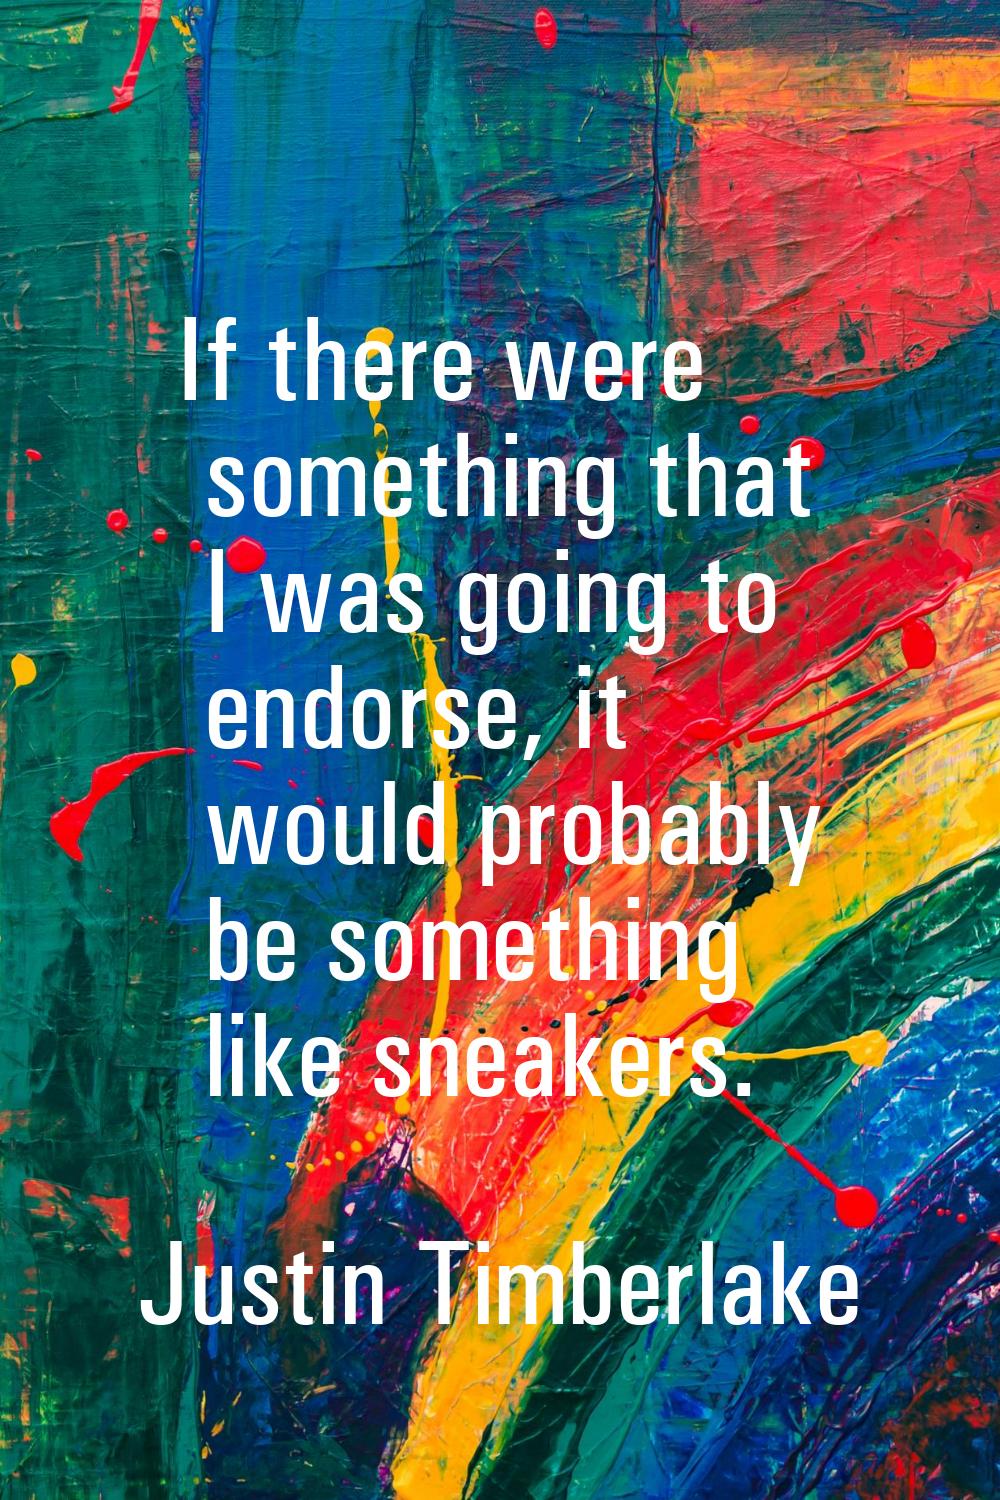 If there were something that I was going to endorse, it would probably be something like sneakers.